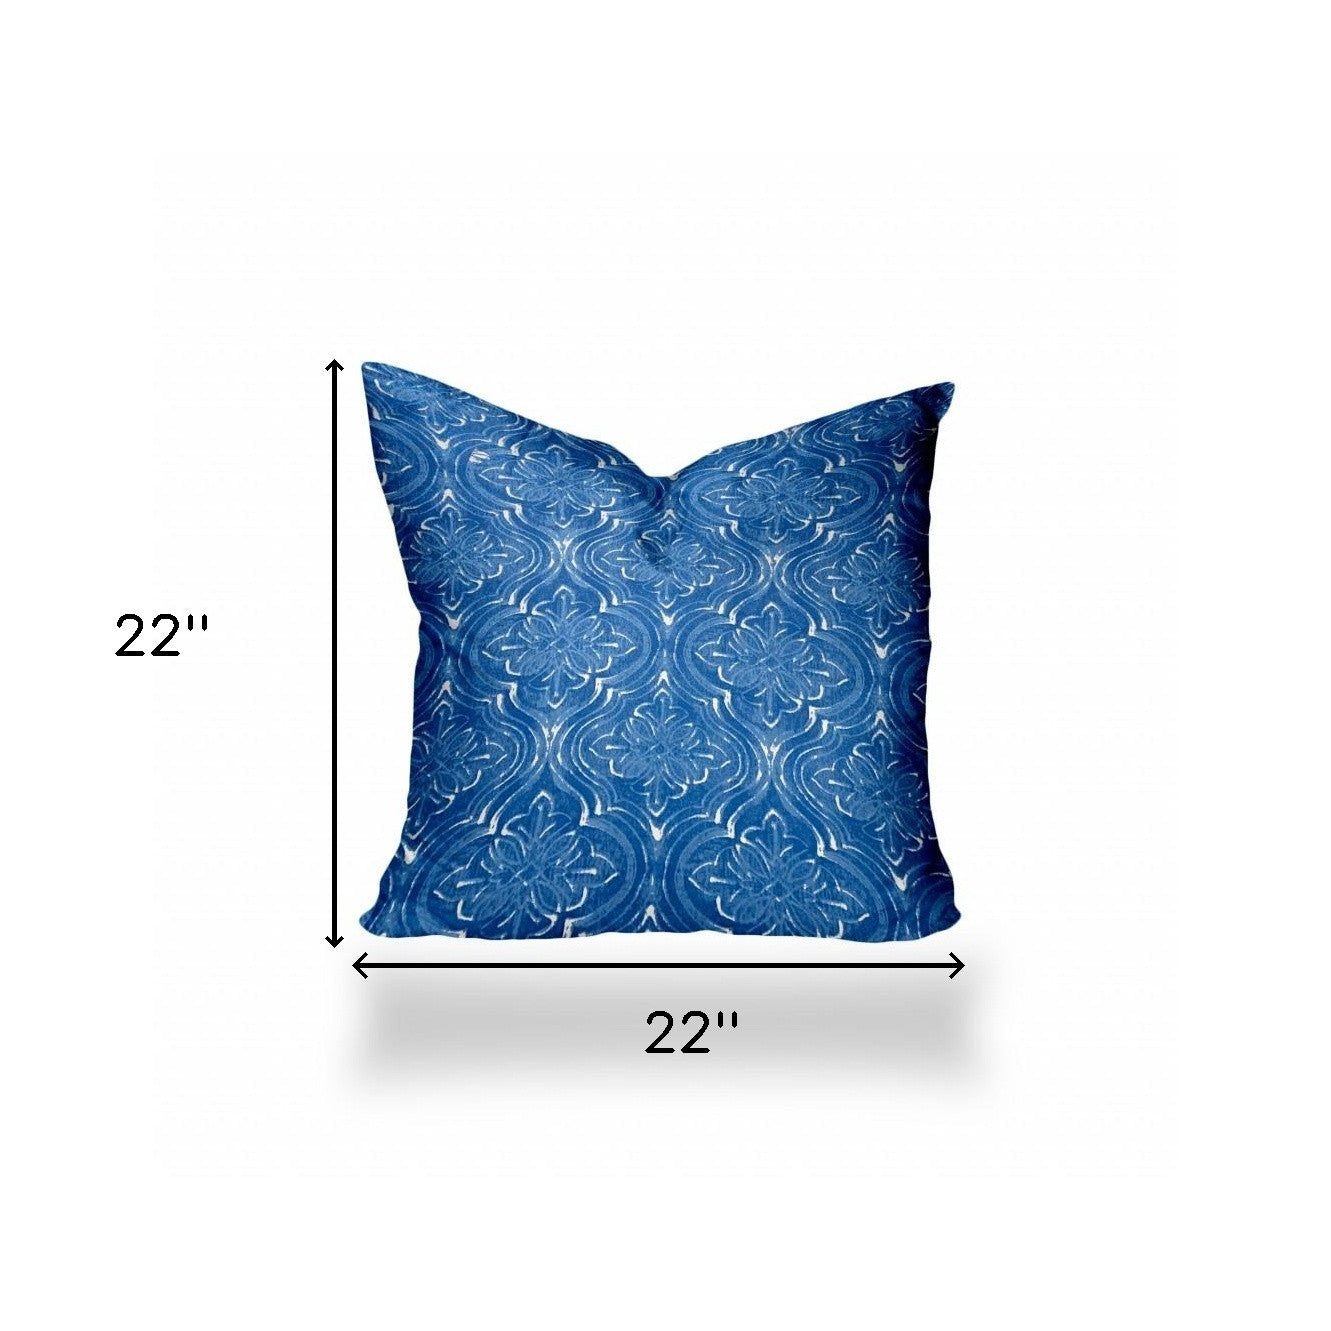 22" X 22" Blue And White Enveloped Ikat Throw Indoor Outdoor Pillow